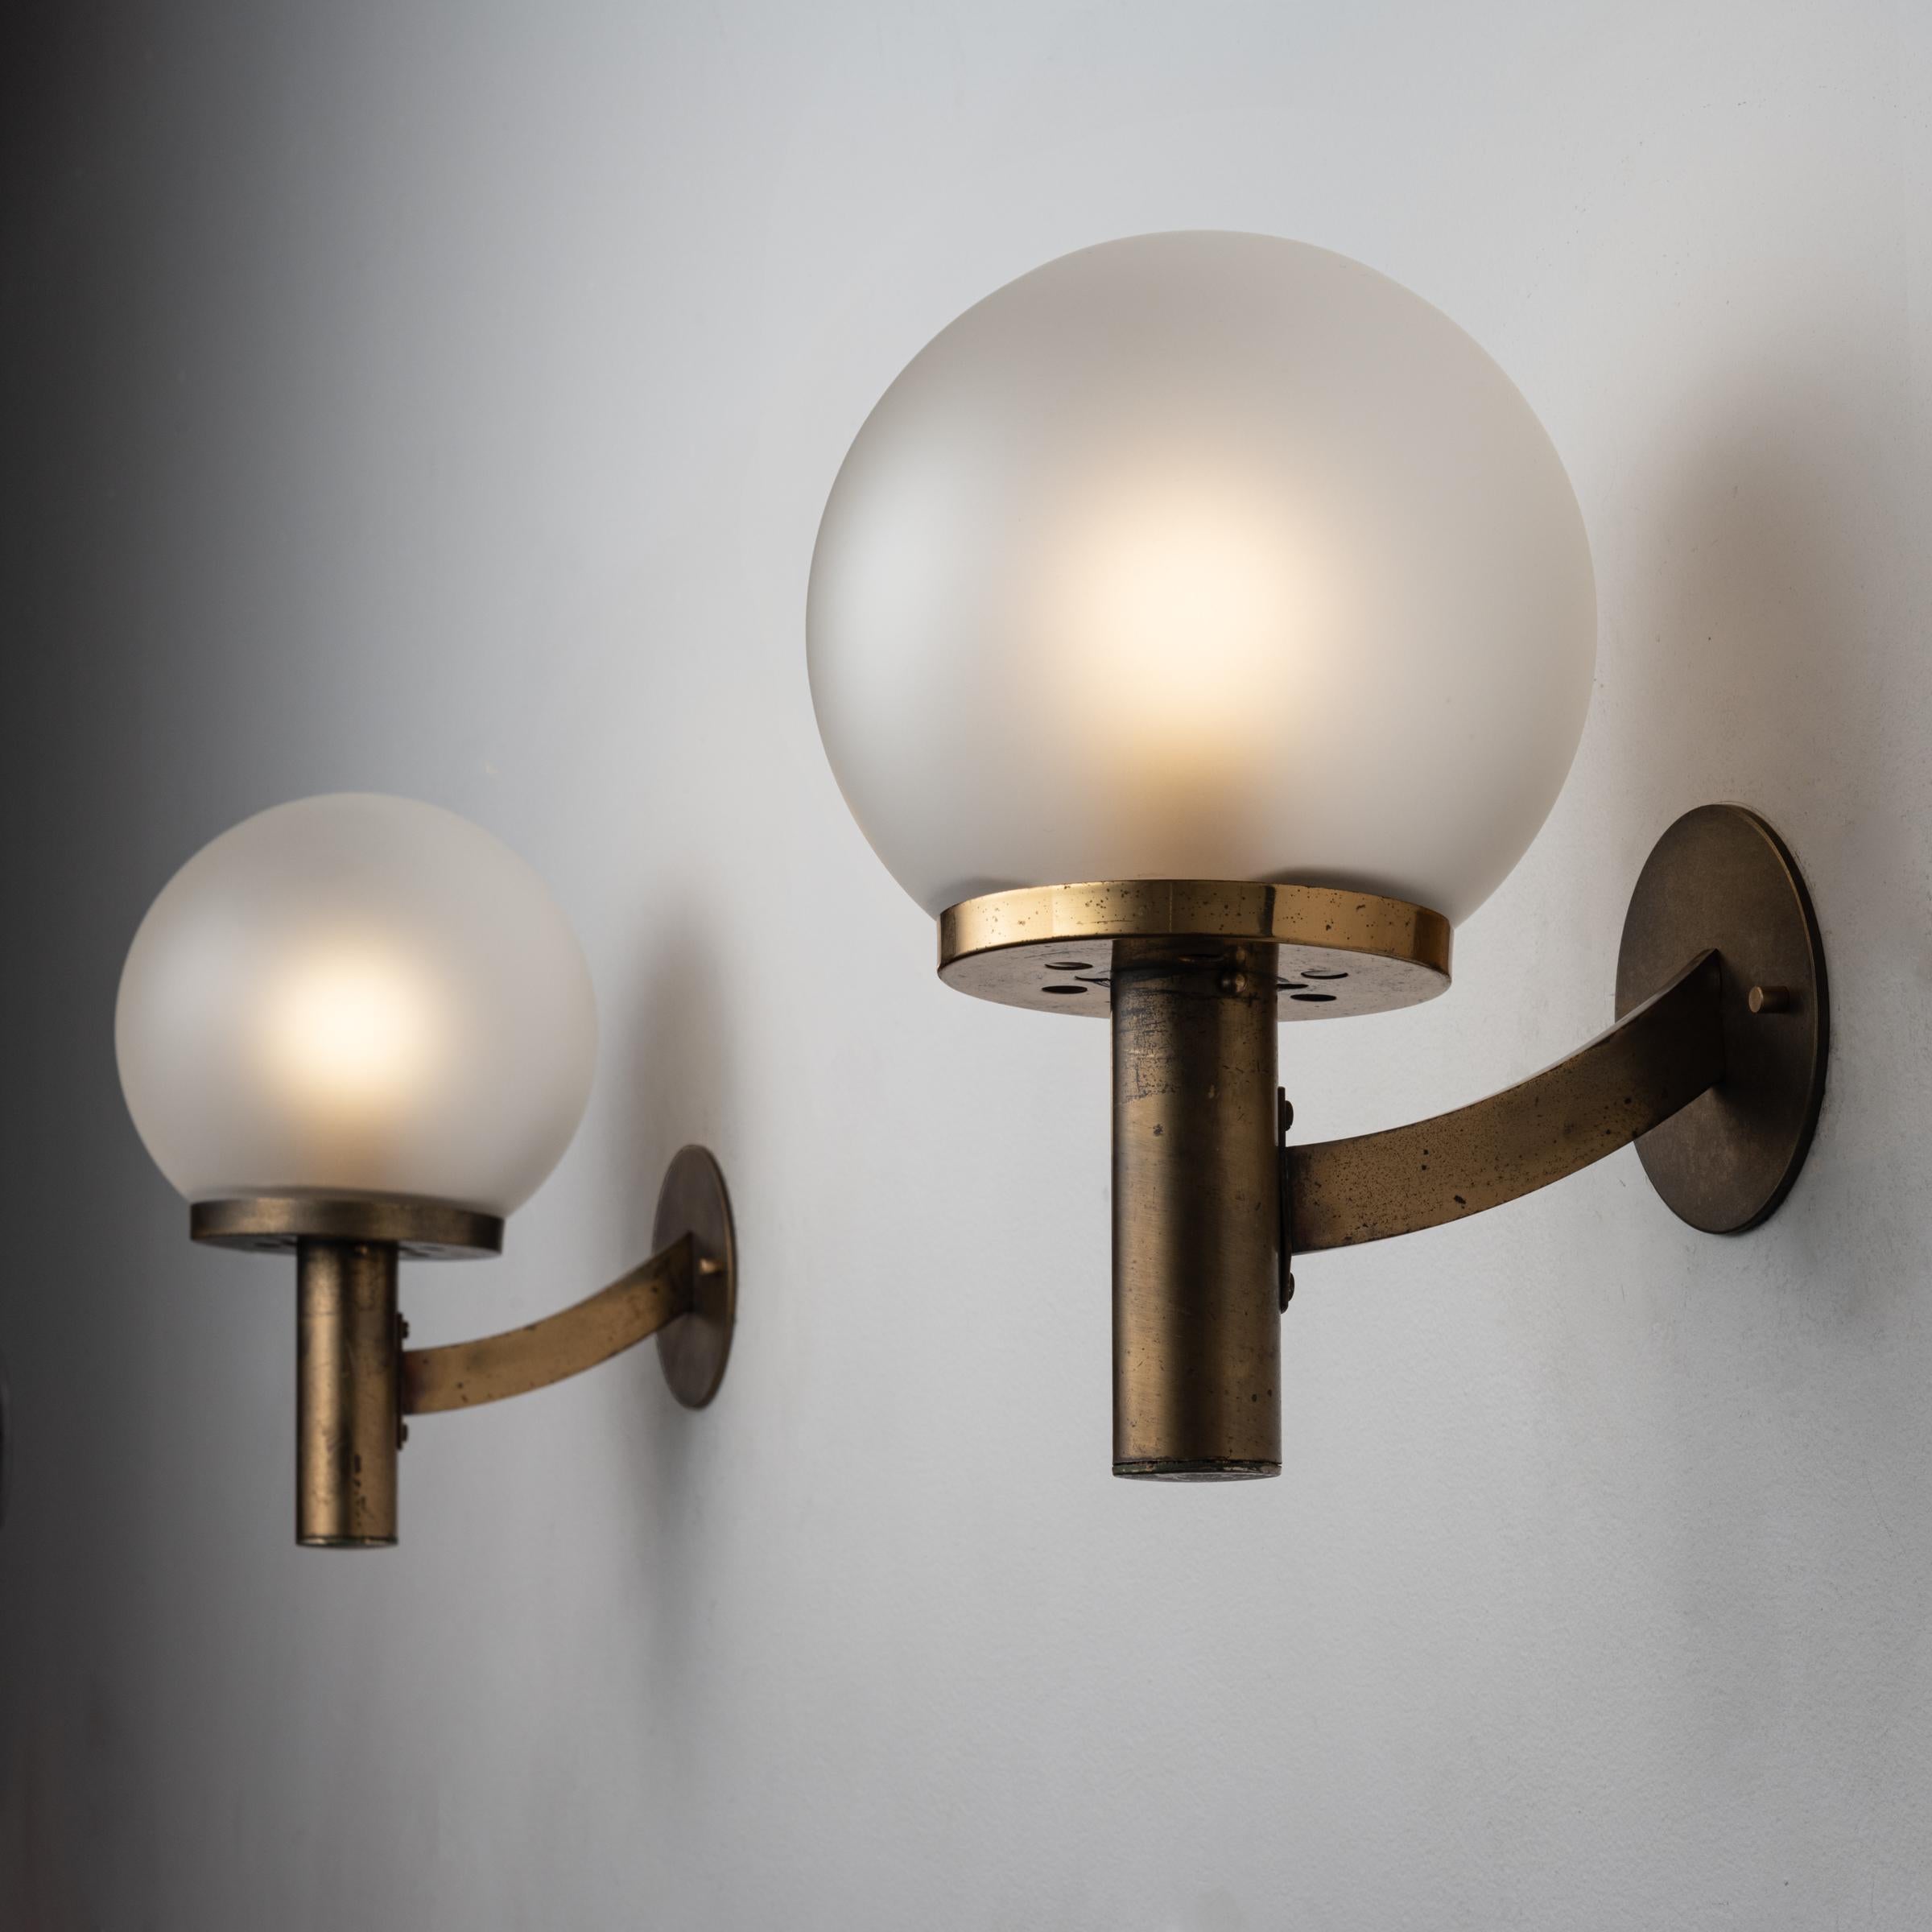 Two Italian Sconces. Designed and manufactured in Italy, circa 1950's. Opaline glass diffuser, brass. Custom brass backplates. Wired for U.S. standards. We recommned one E14 candelabra 60w maximum bulb per light. Bulbs not included. Priced and sold